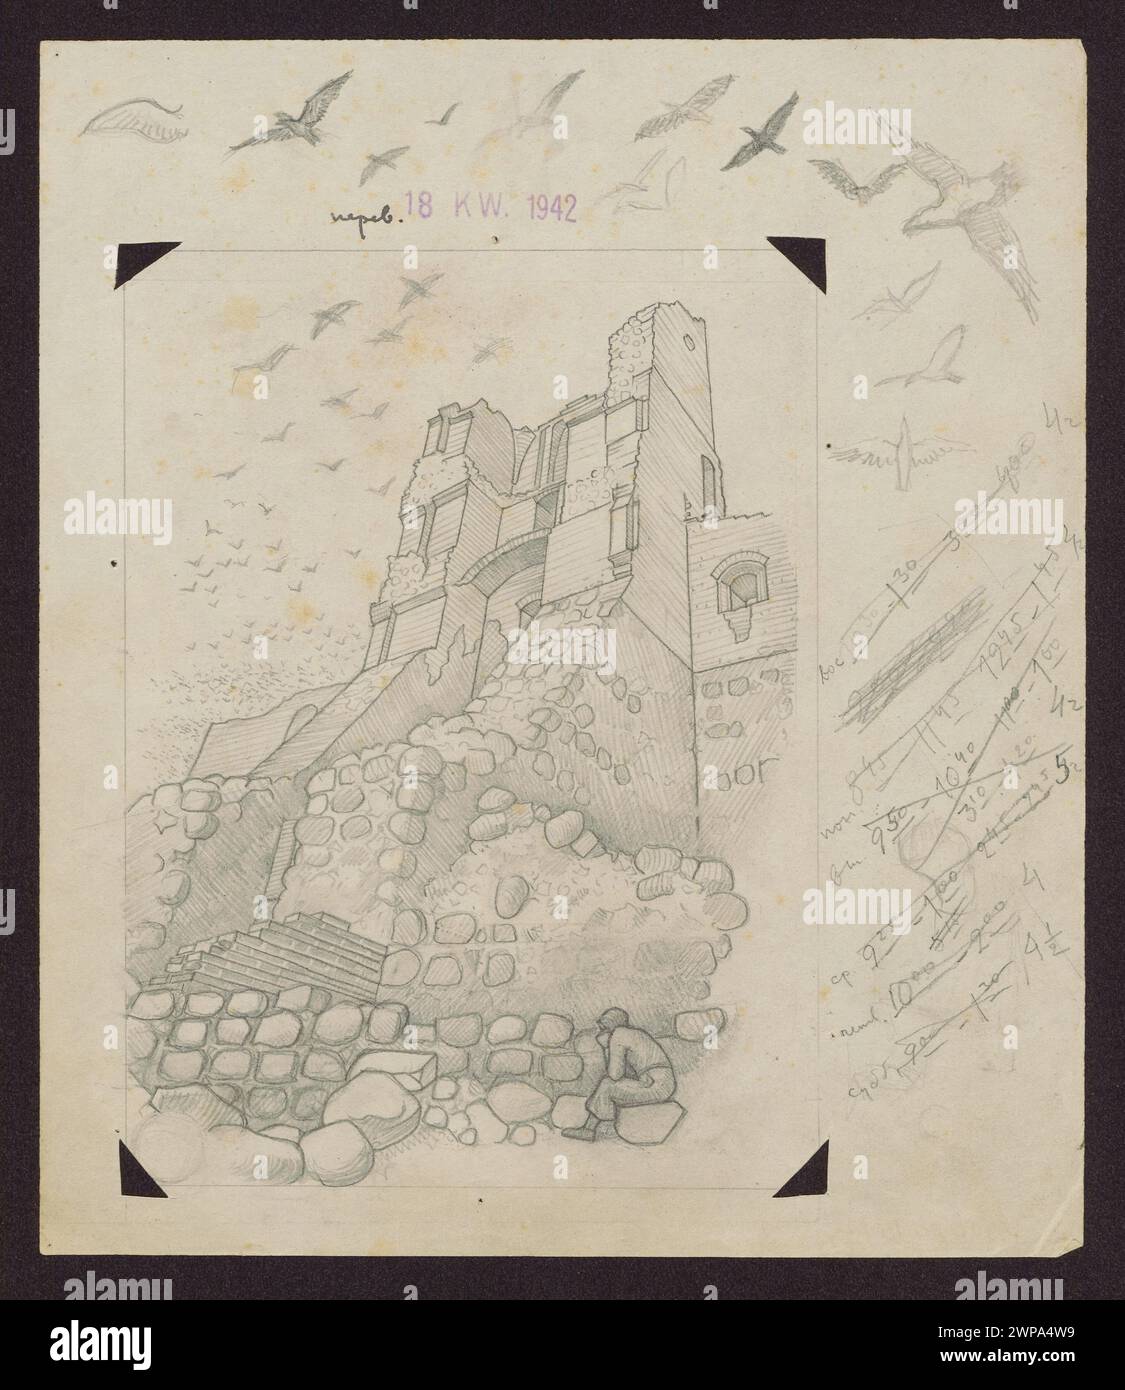 Ruins with a closed man, sketches for graphics from the TRAKI series; Romanowicz, Walenty; 1941-1944 (1941-00-00-1944-00-00); Stock Photo